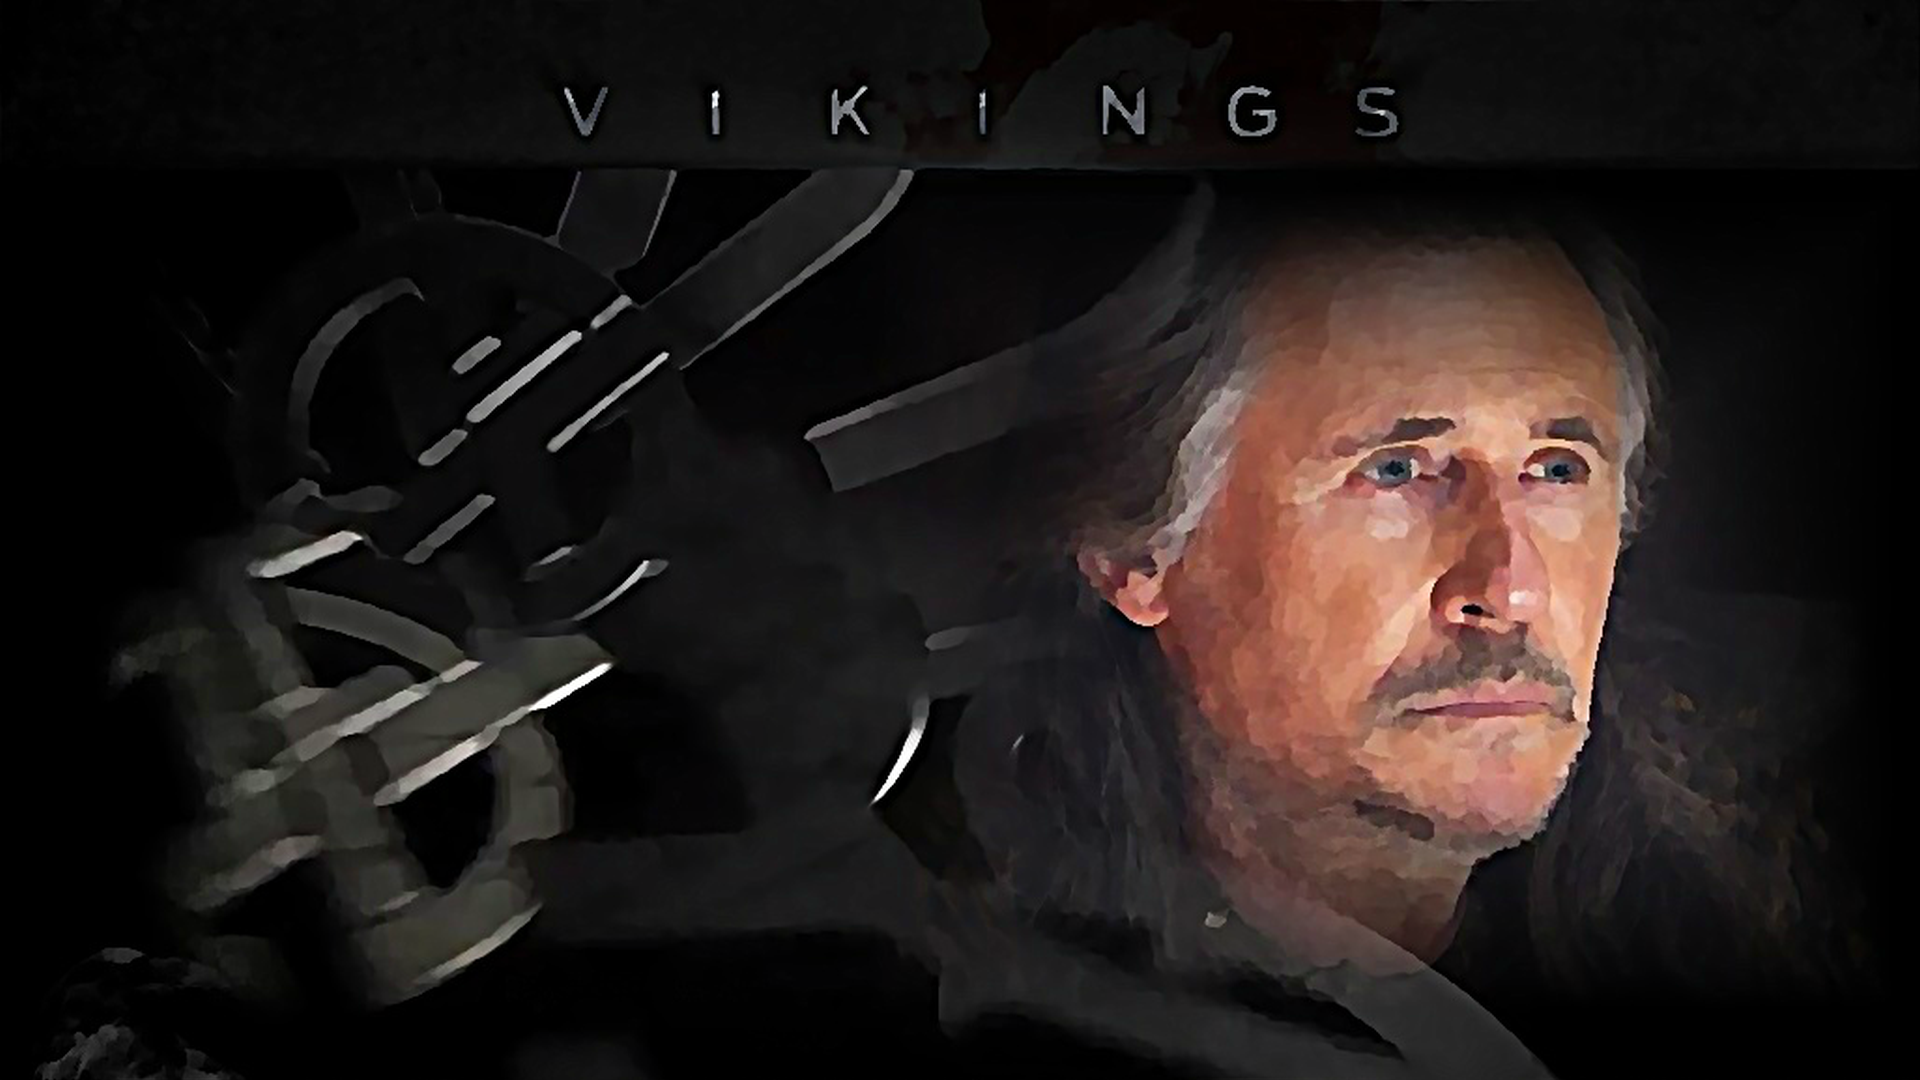 Top Vikings Wallpaper History Channel Images for Pinterest